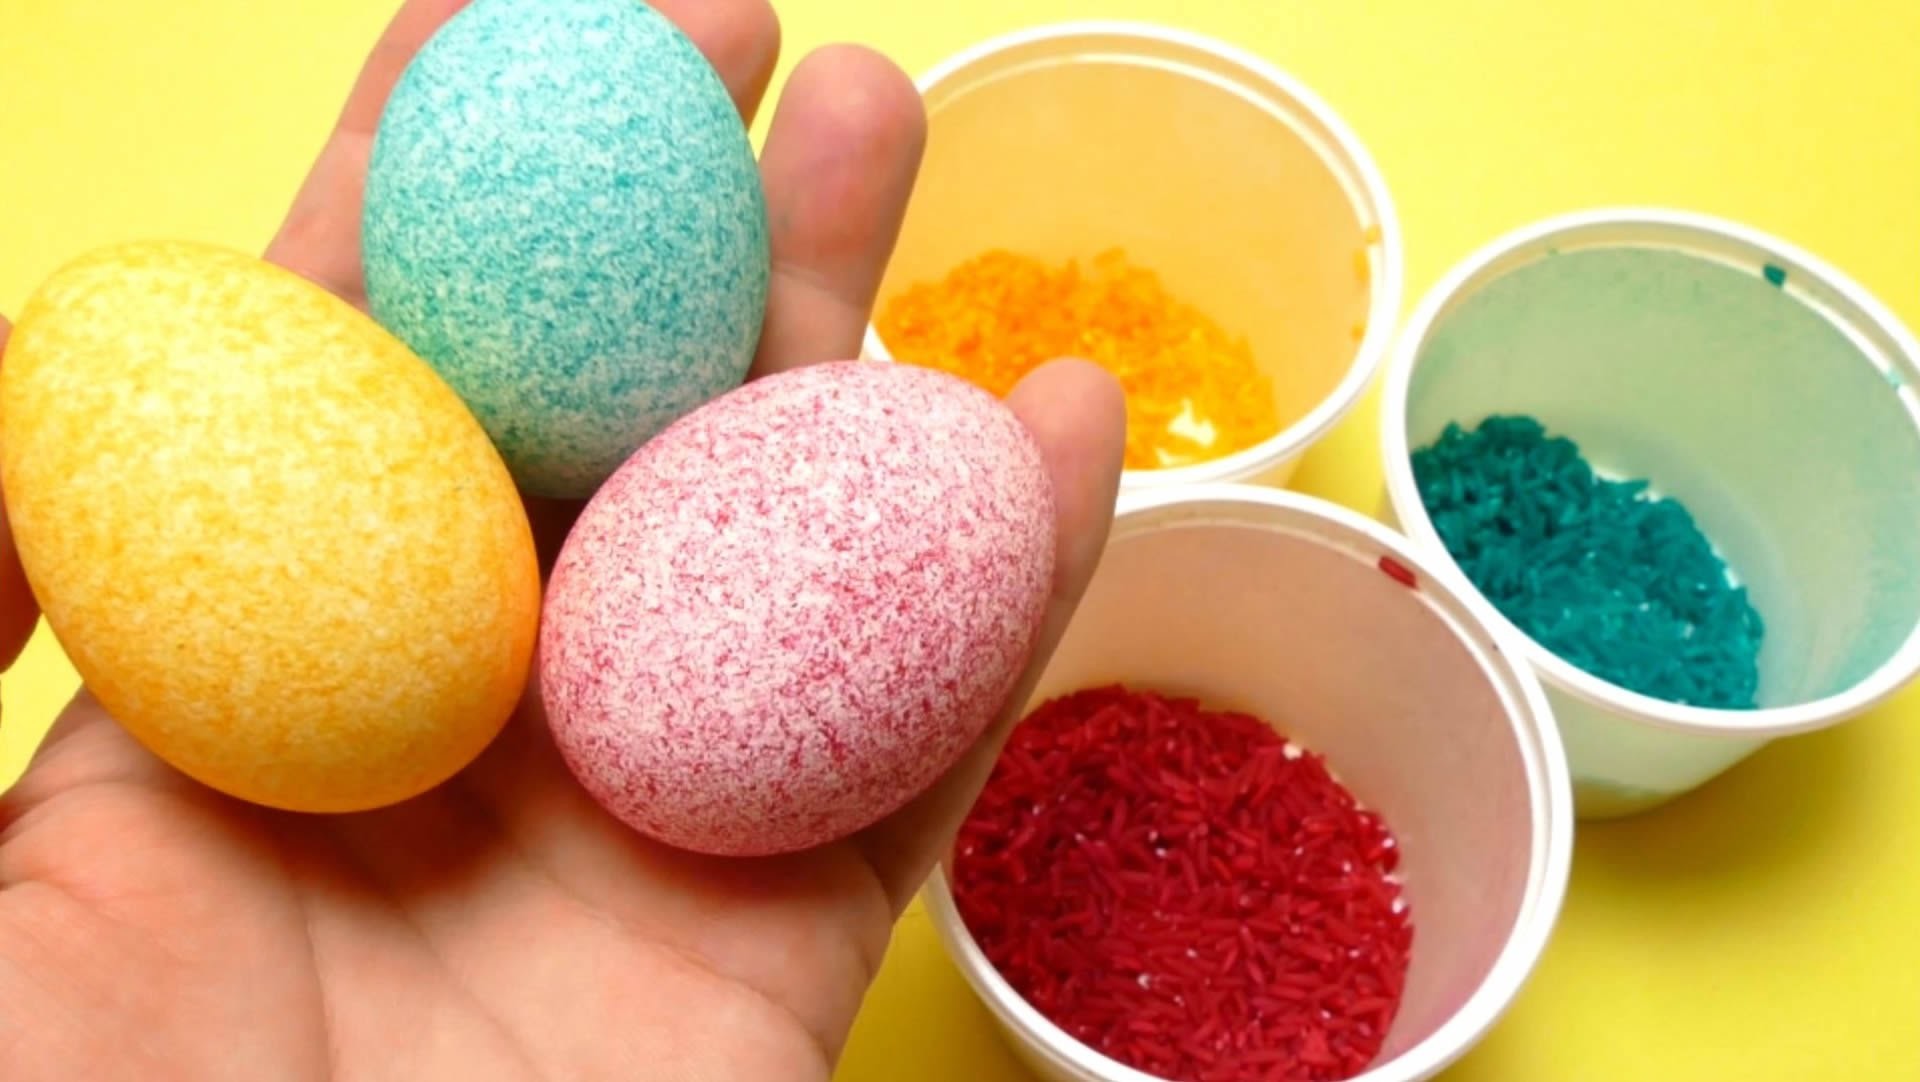 Easter Egg Coloring - Decorating with Rice - DIY Shake It Video